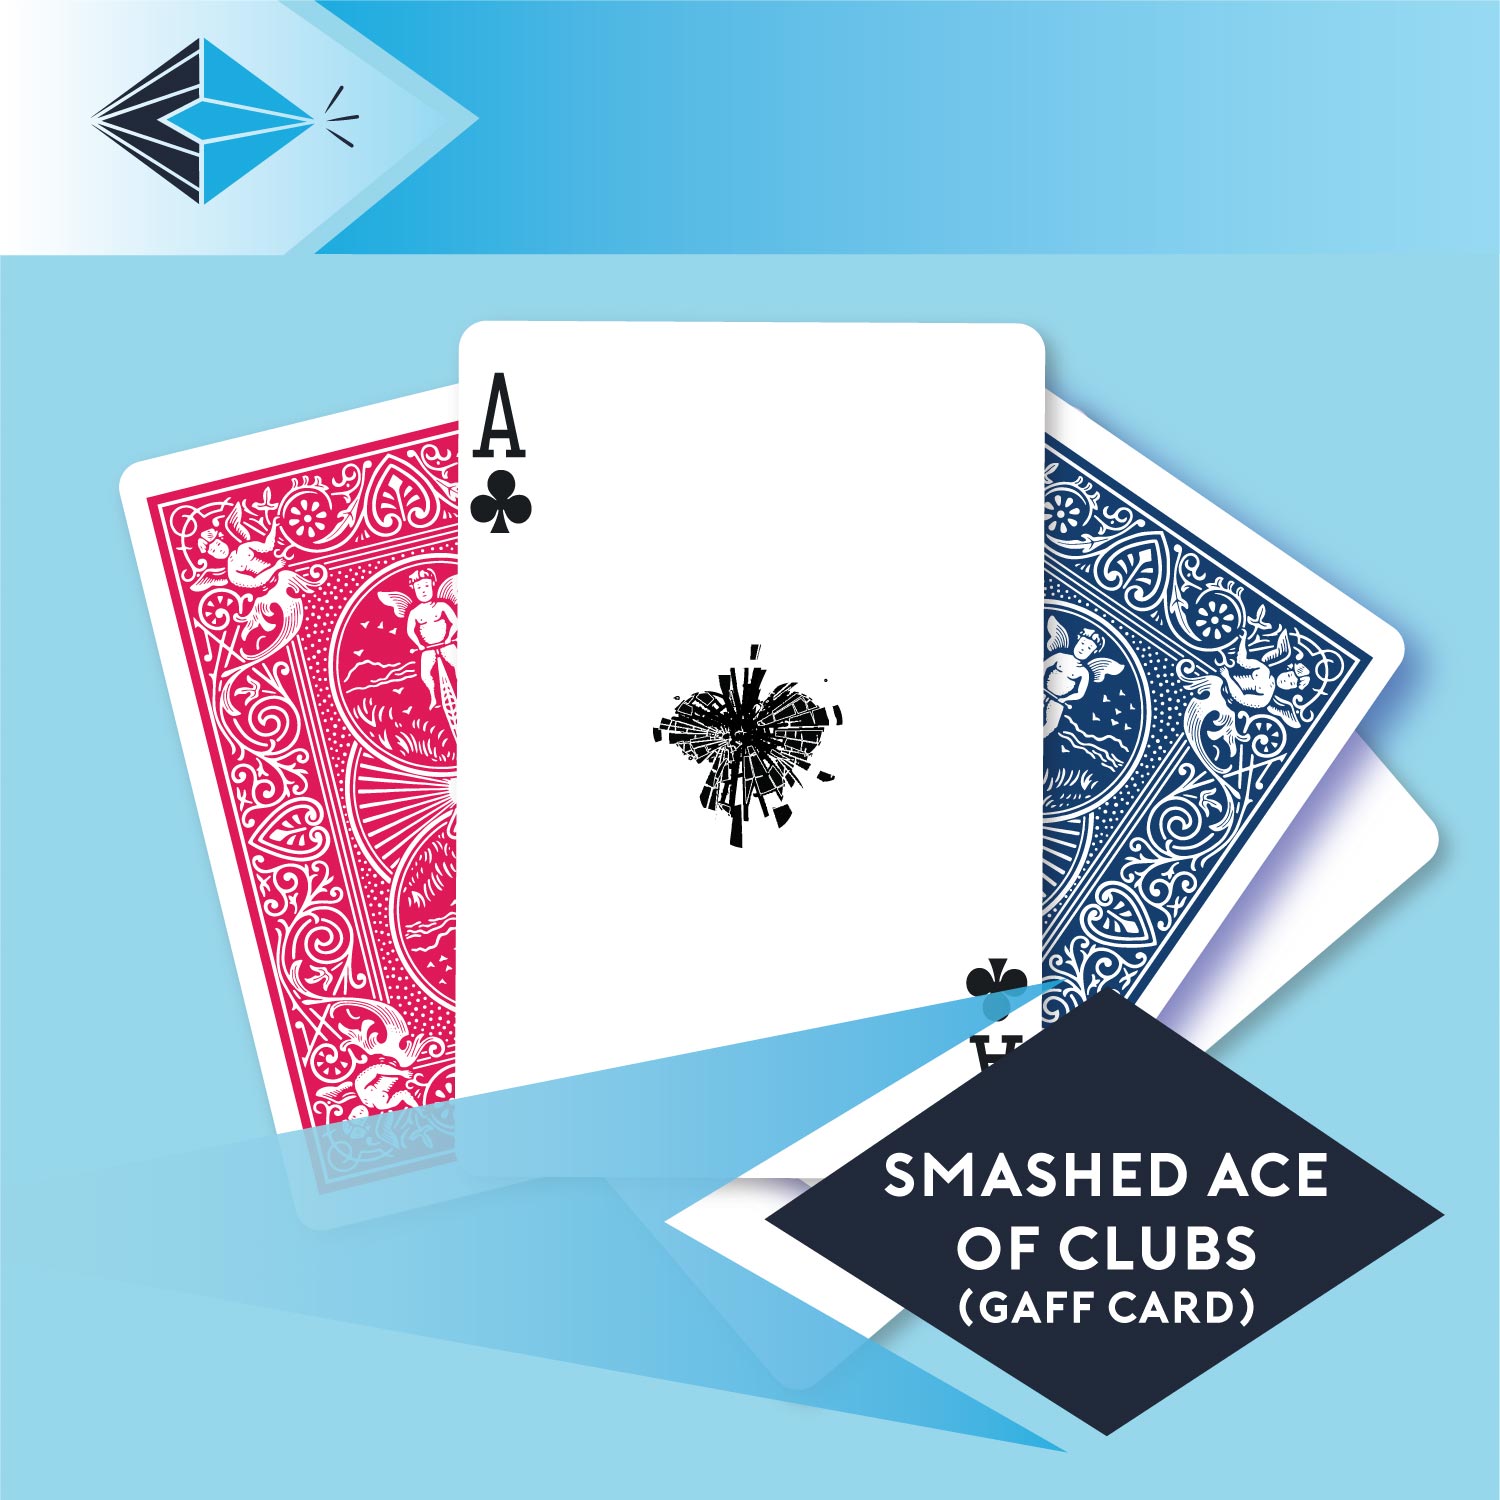 smashed ace of clubs gaff card 8 printbymagic magicians gaff cards printers Stockport Manchester UK